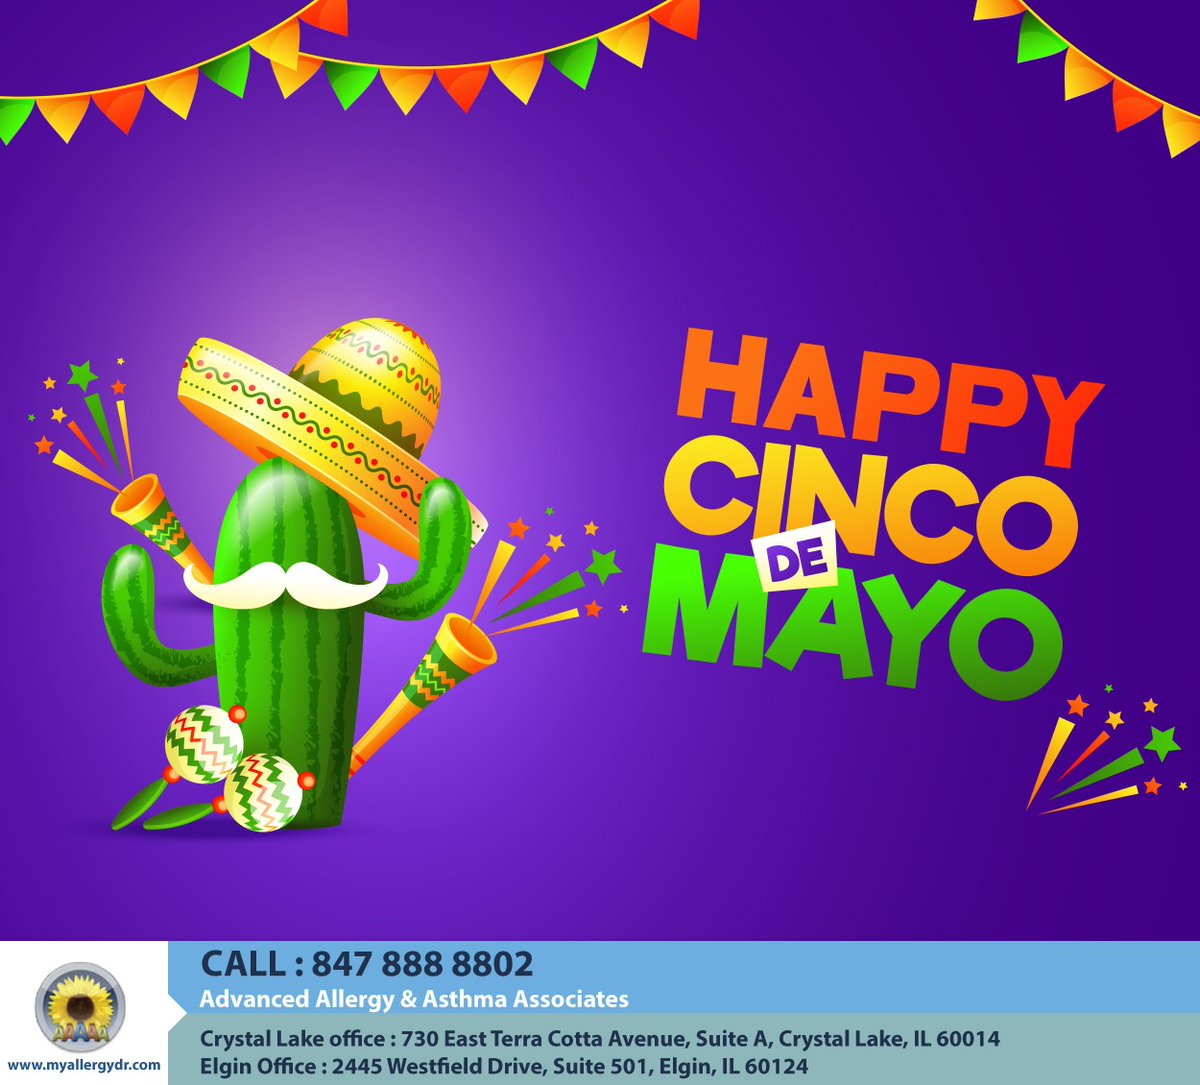 Hey amigos, happy Cinco de Mayo. May your day be filled with fun fiestas as we celebrate liberty and unity on this special day. #cincodemayo #crystallake #IL #myallergydr